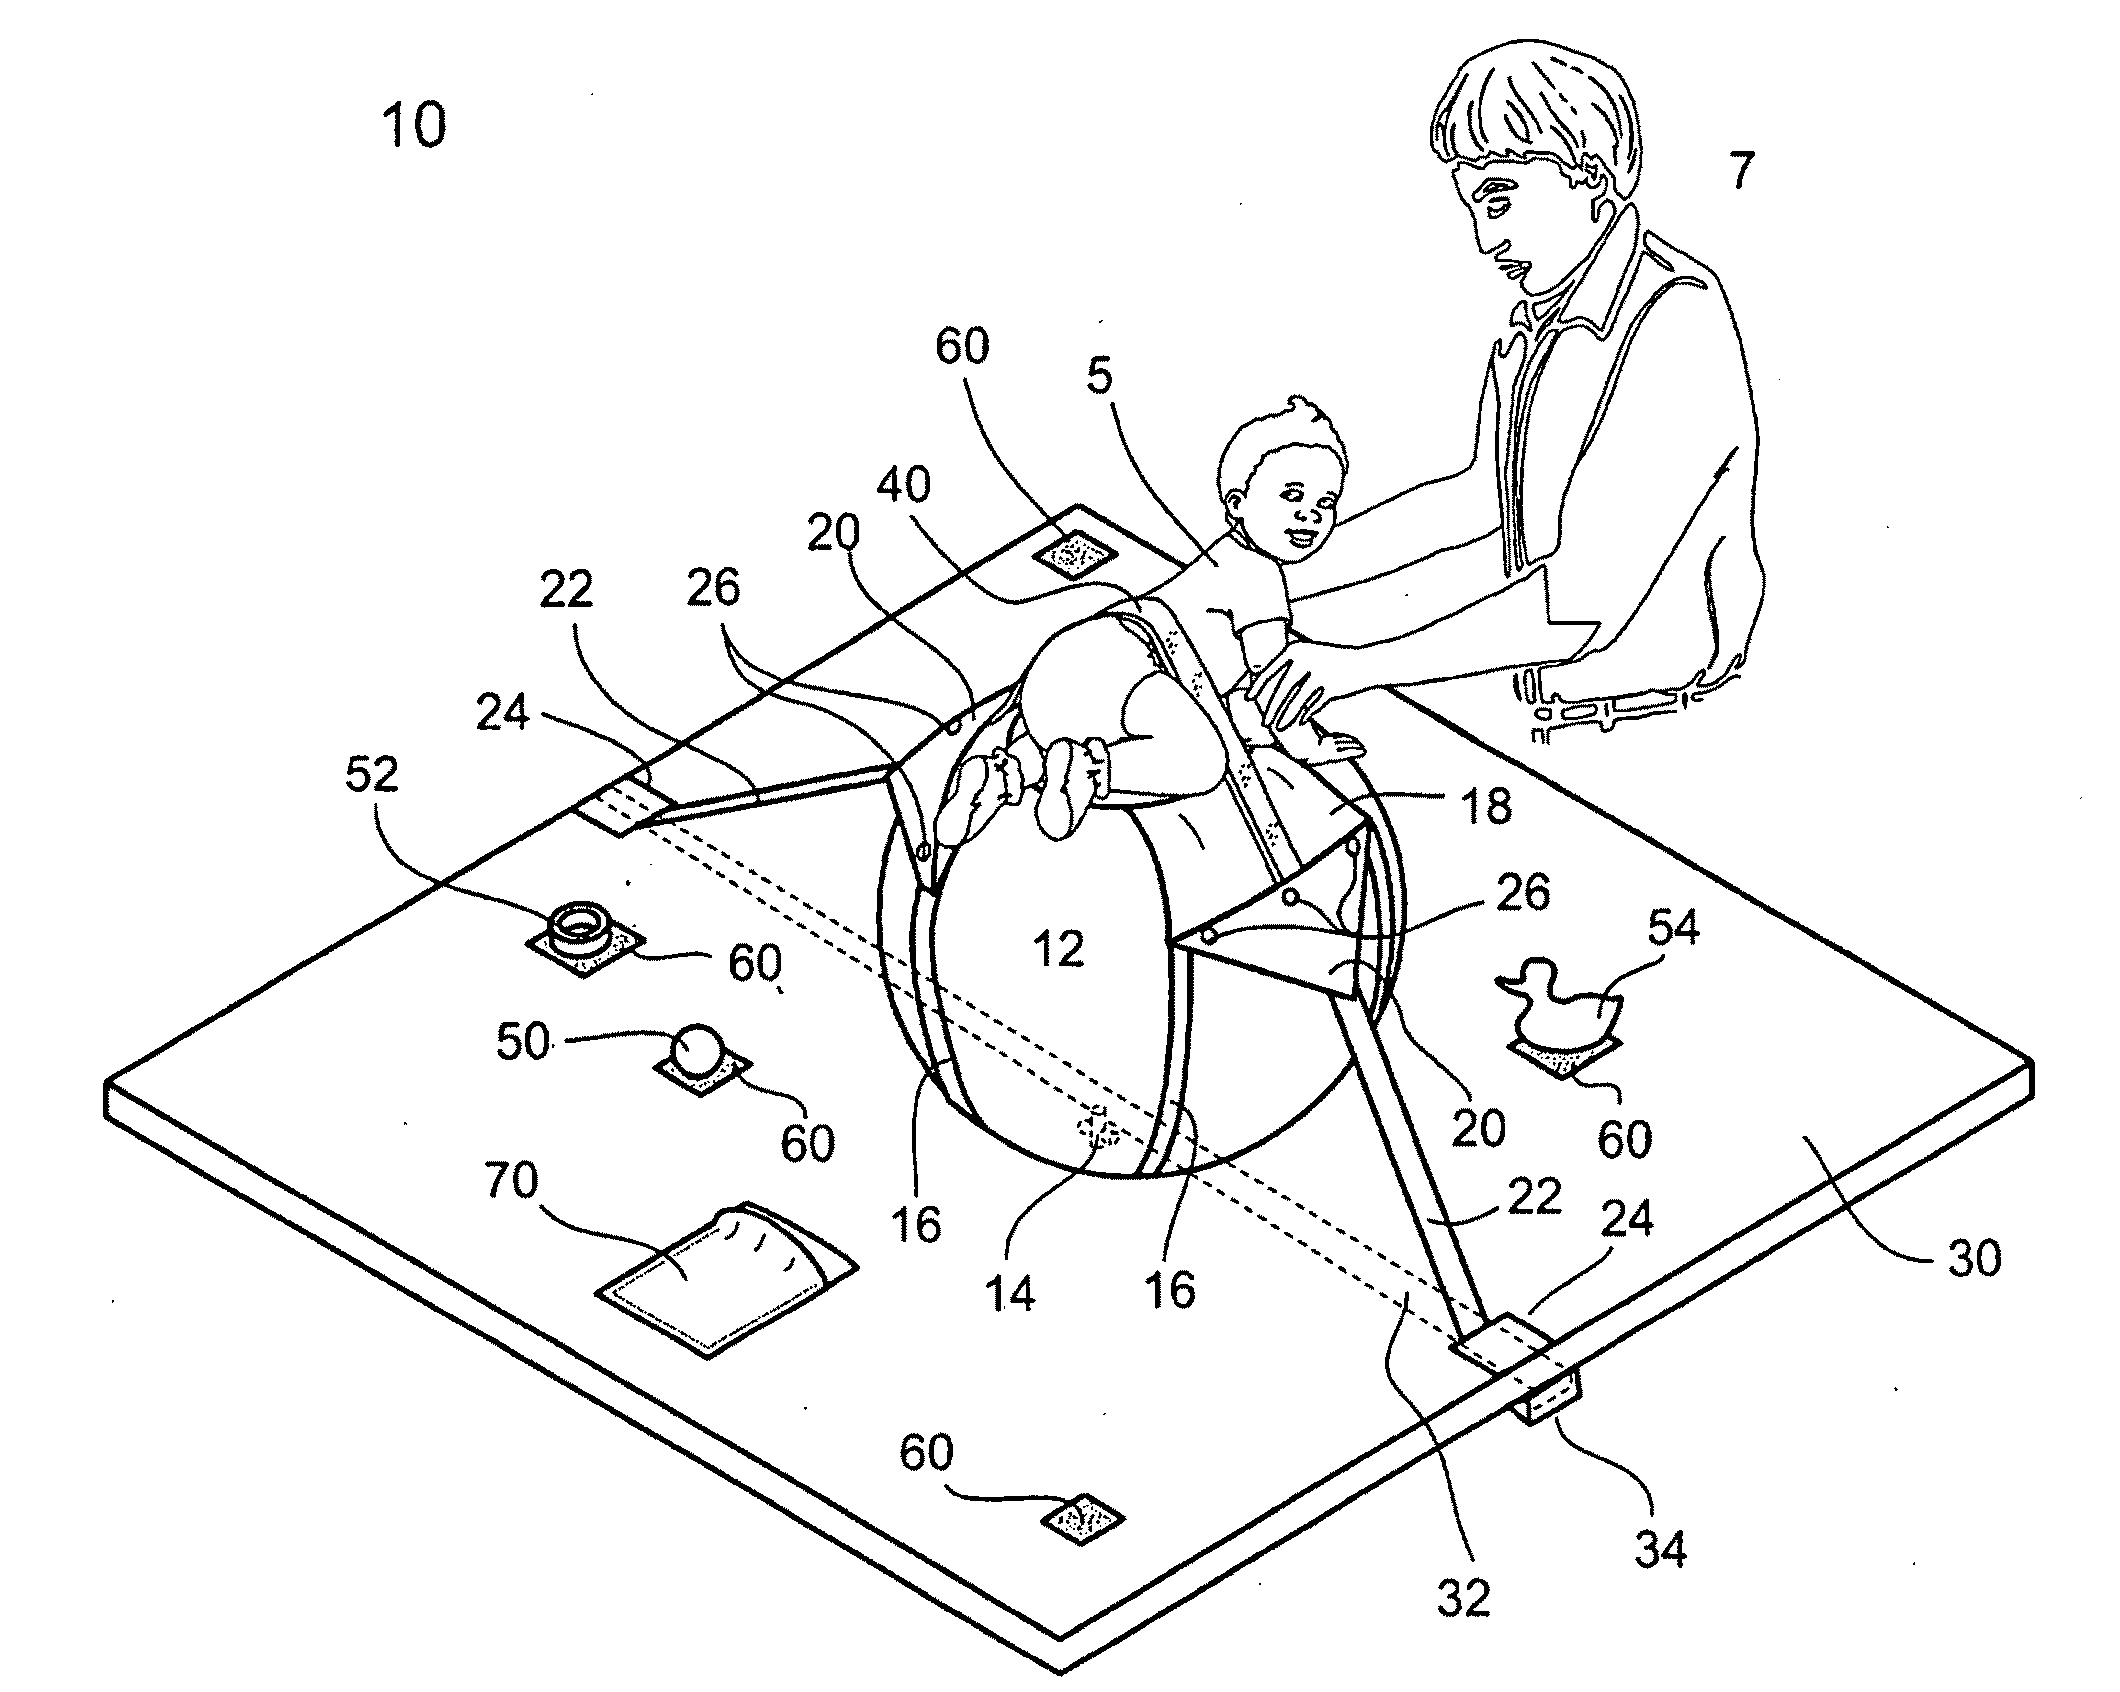 Device and Method for Occupying a Human Subject with Physical and Mental Activities